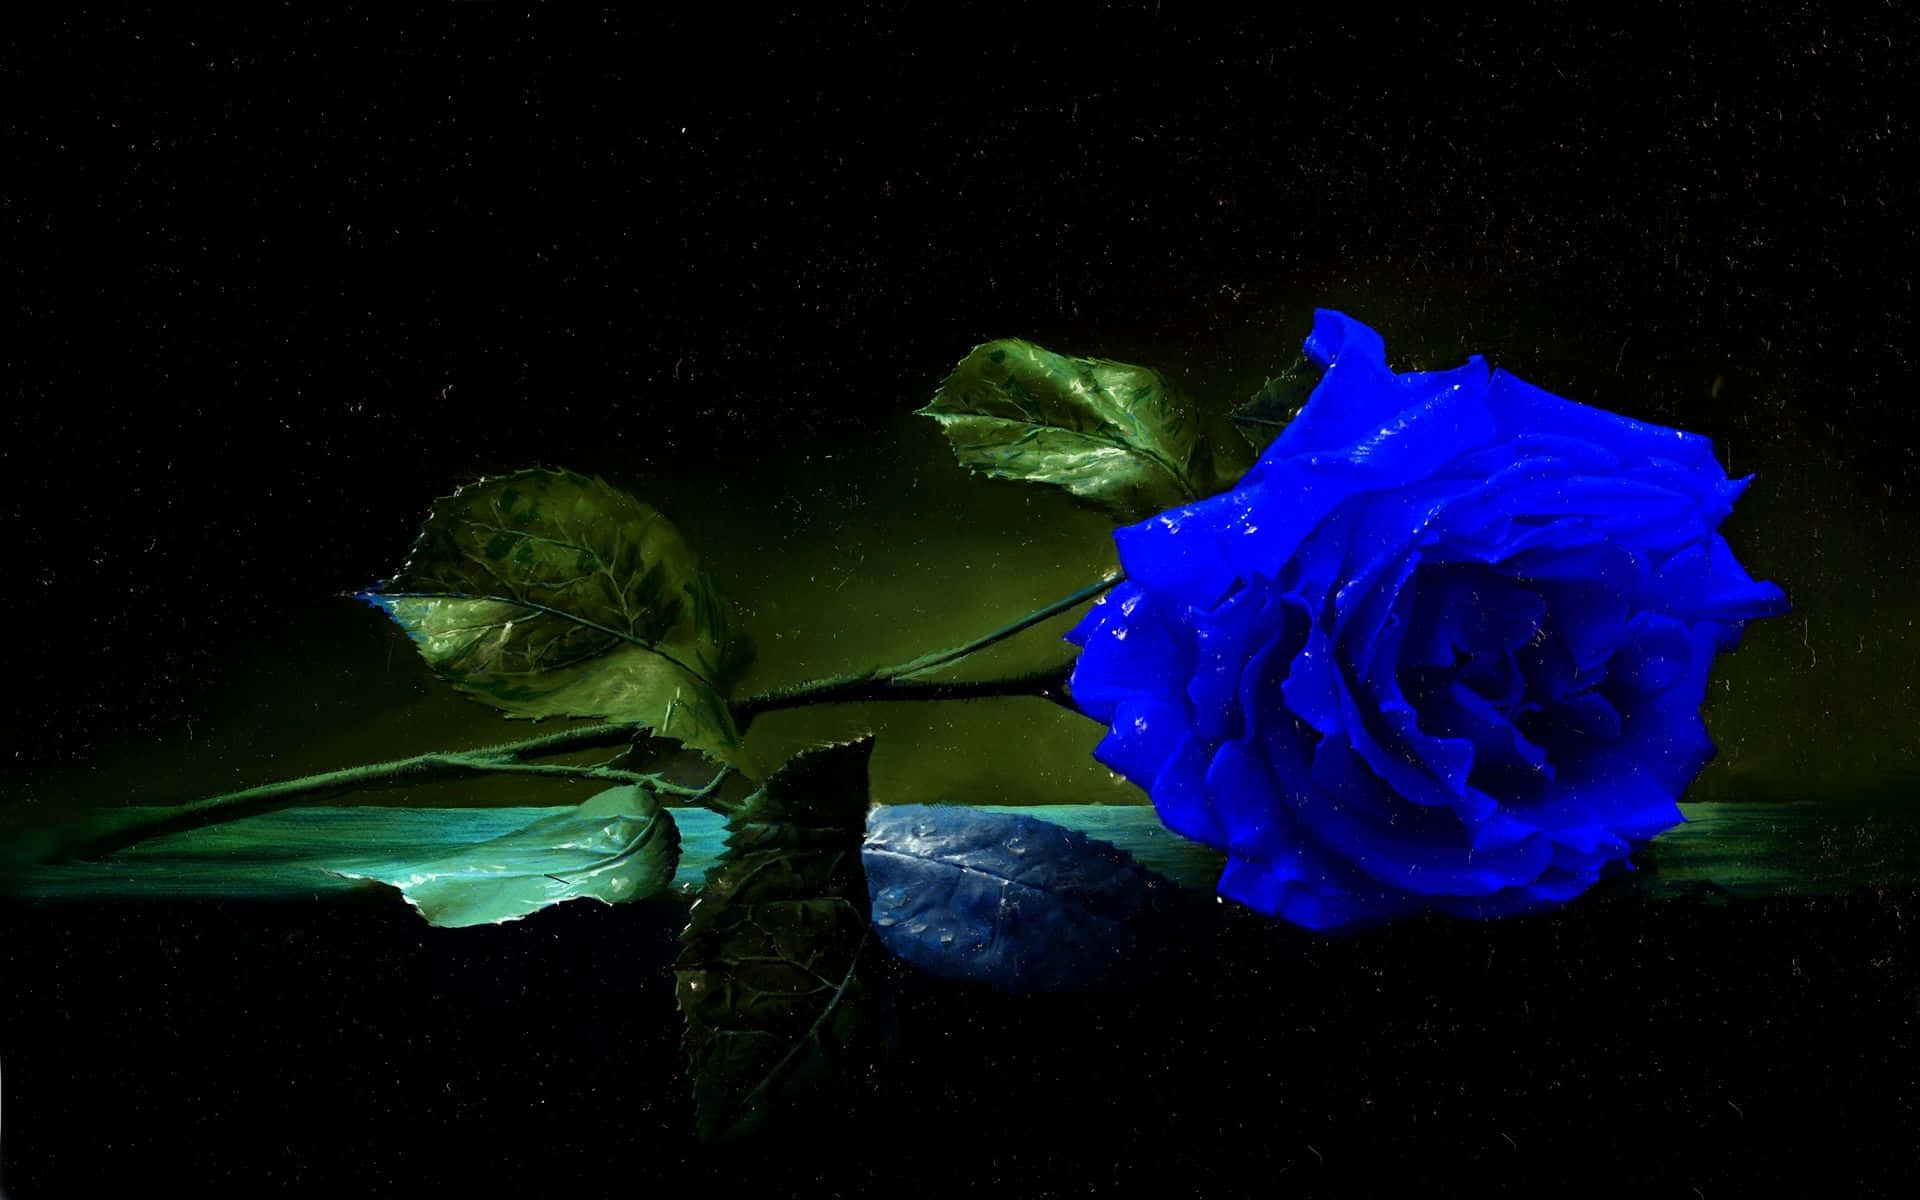 A Stunning Blue Rose, Symbolizing The Rare And Mysterious.